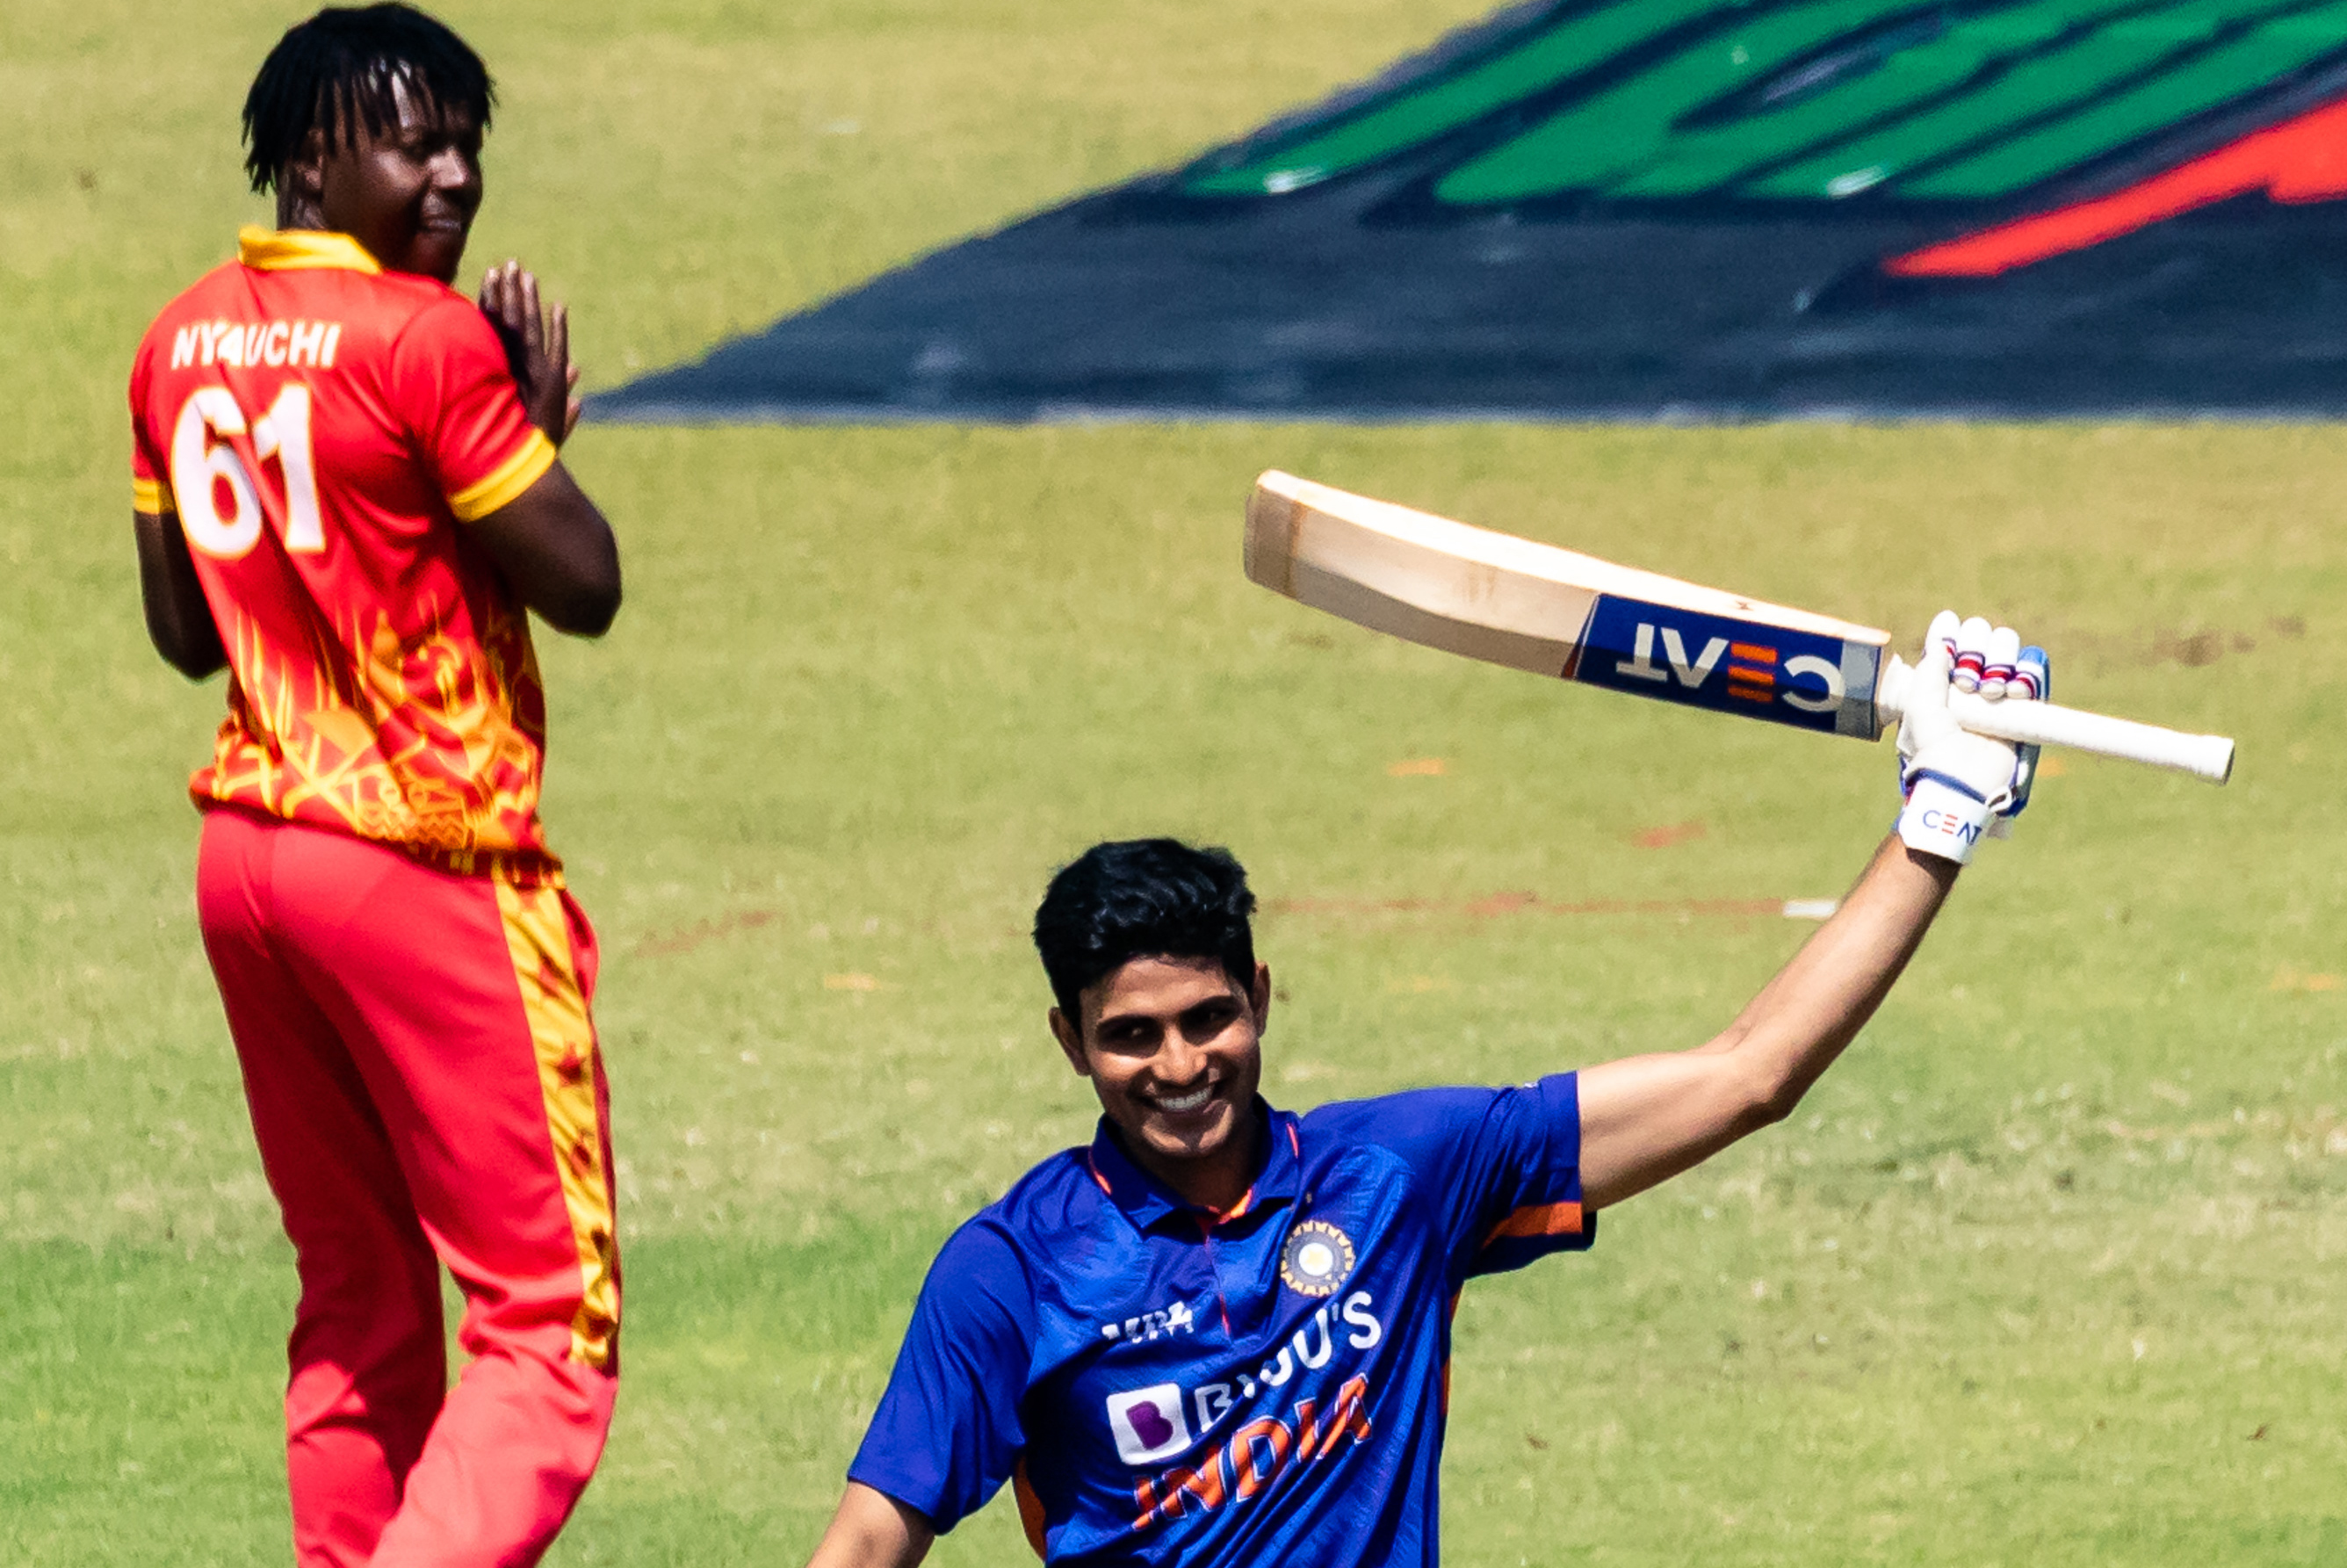 ZIM vs IND 2022 | Shubman Gill becomes third youngest Indian to score overseas ODI hundred